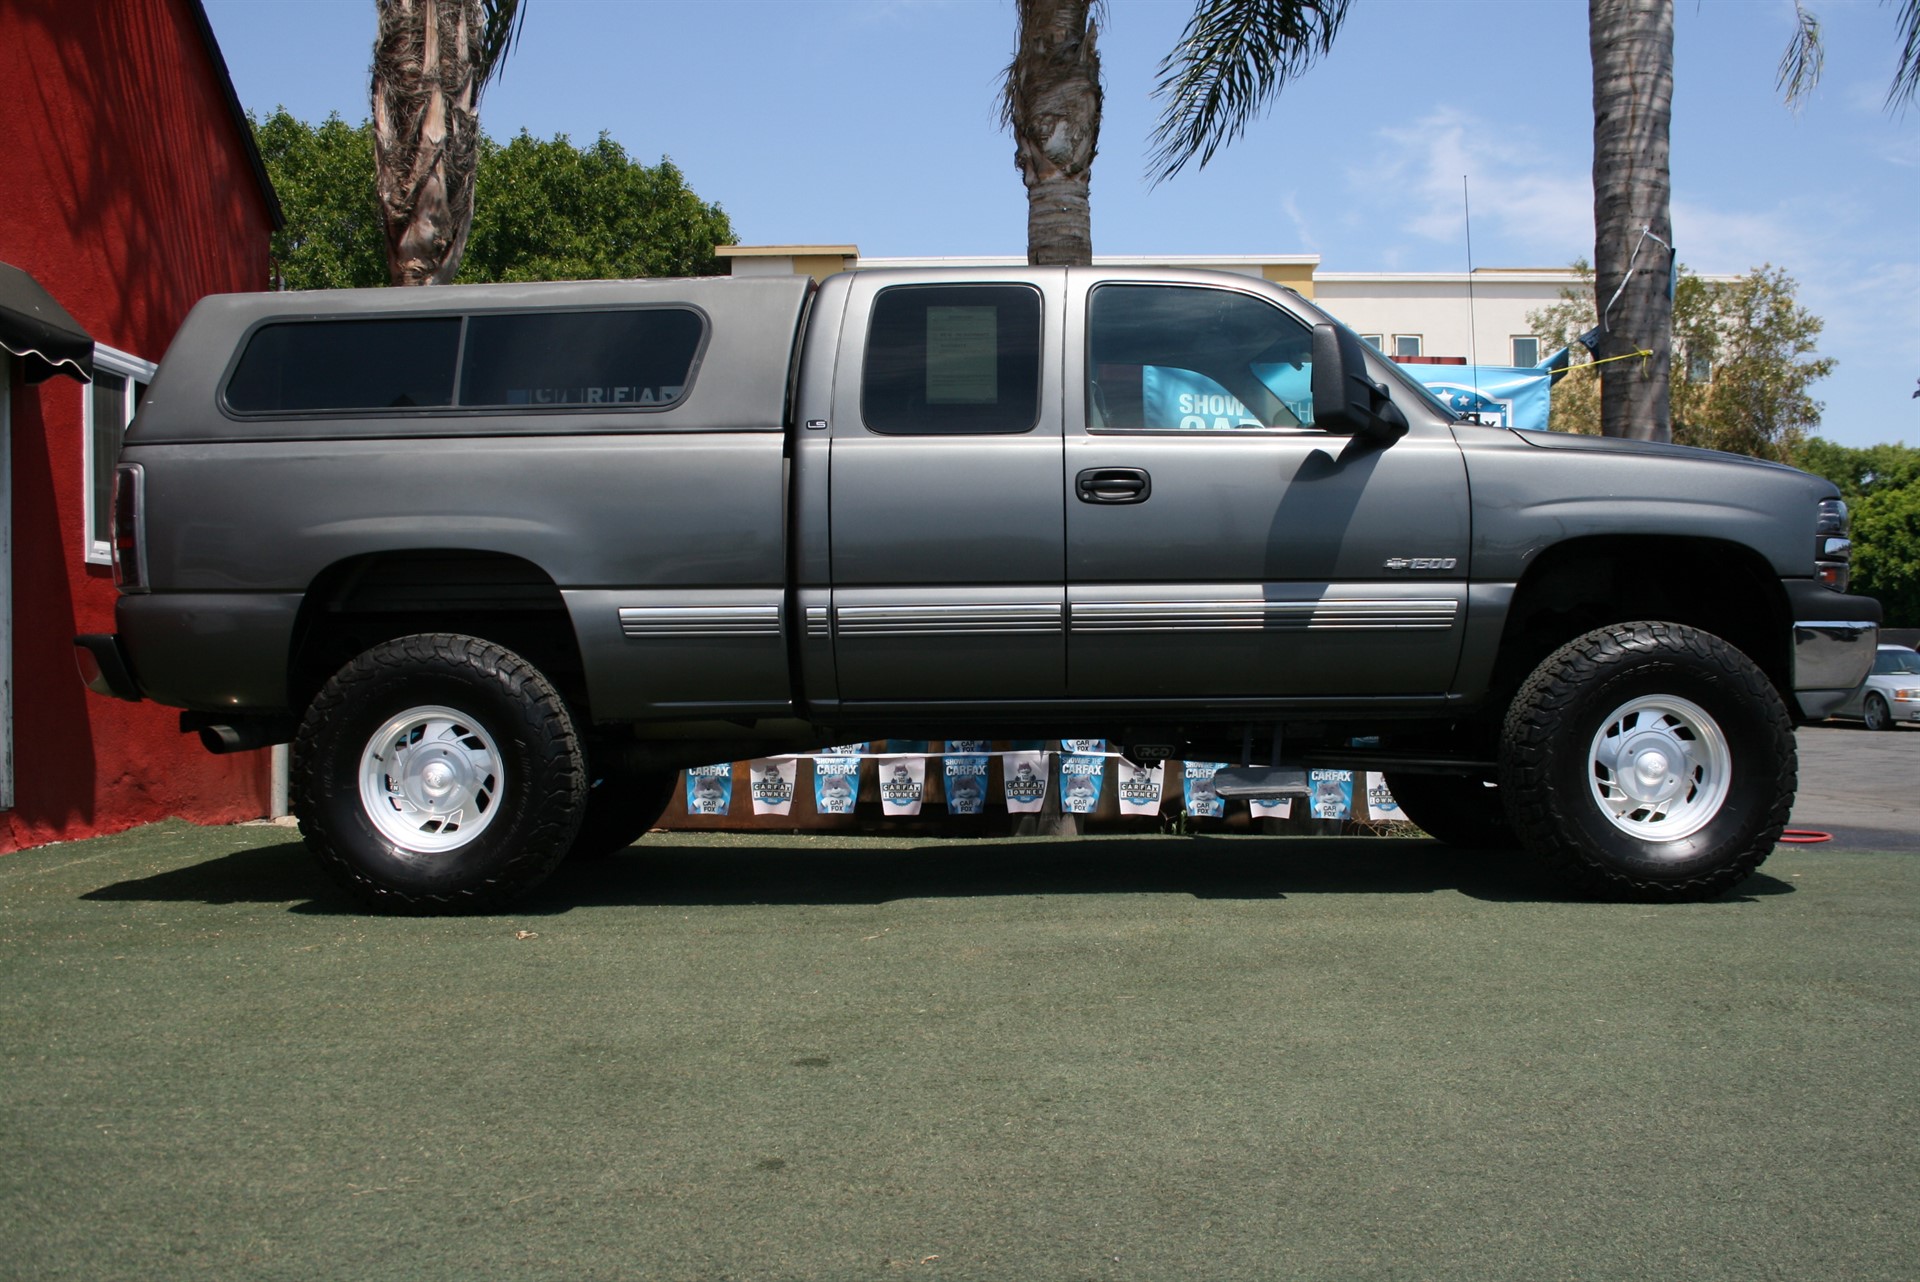 2000 Chevy Silverado LS w/99k miles! Lifted and in great condition!